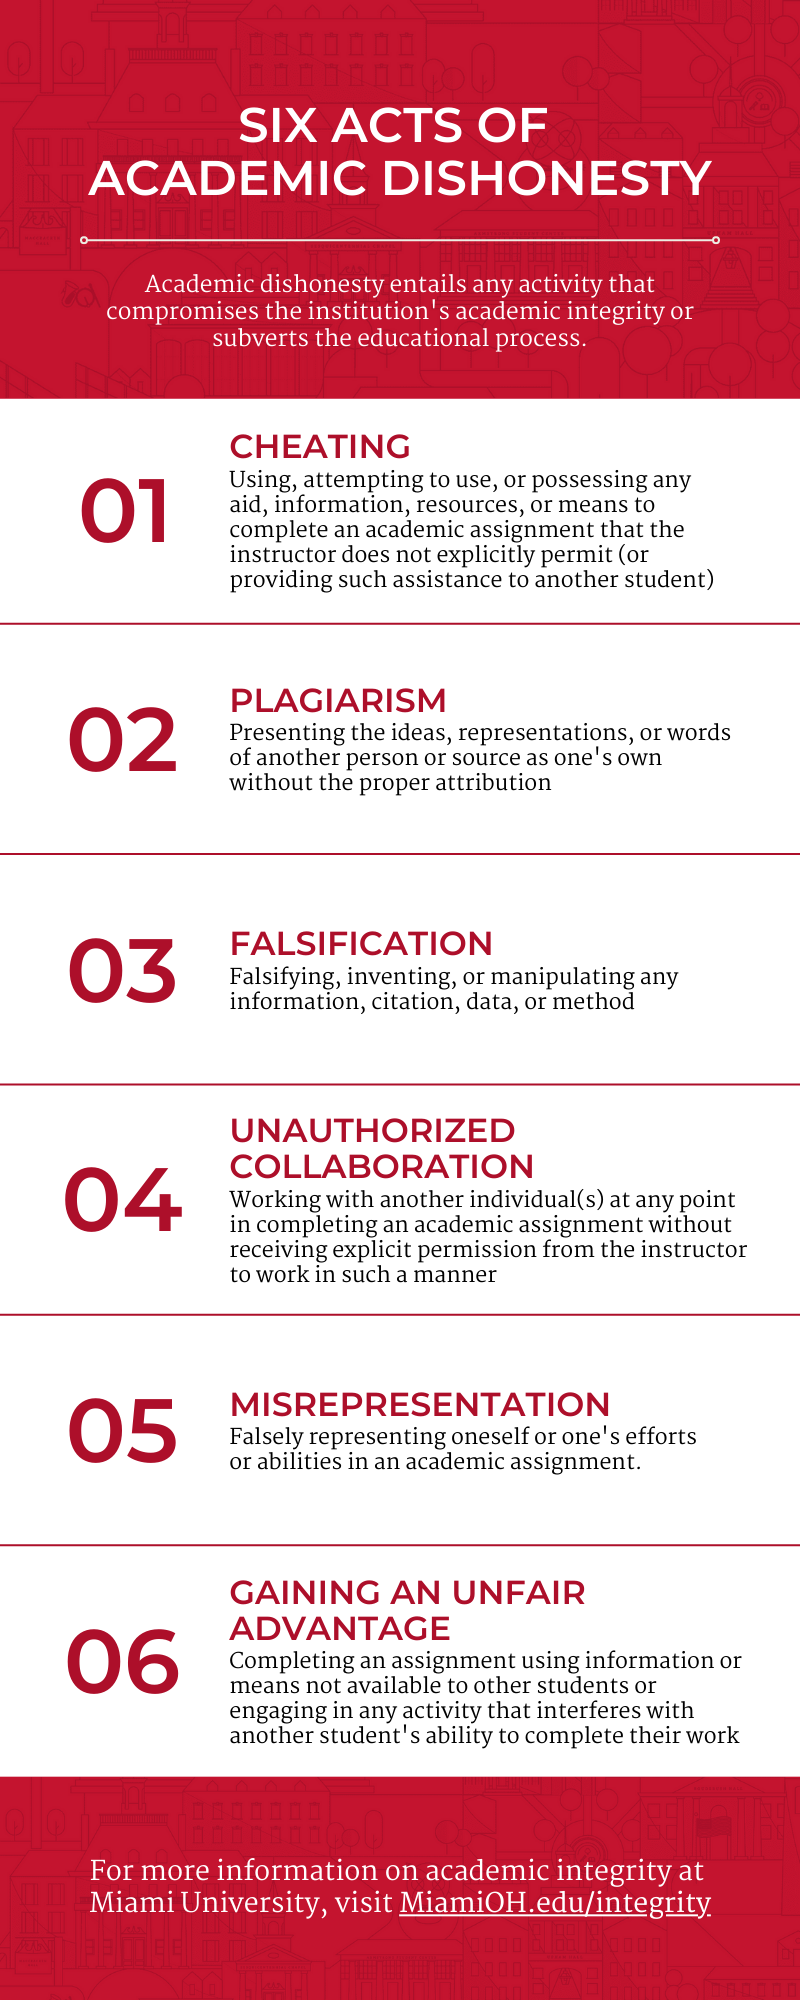 Visual aid outlining the six acts of academic dishonesty listed above in the FAQs